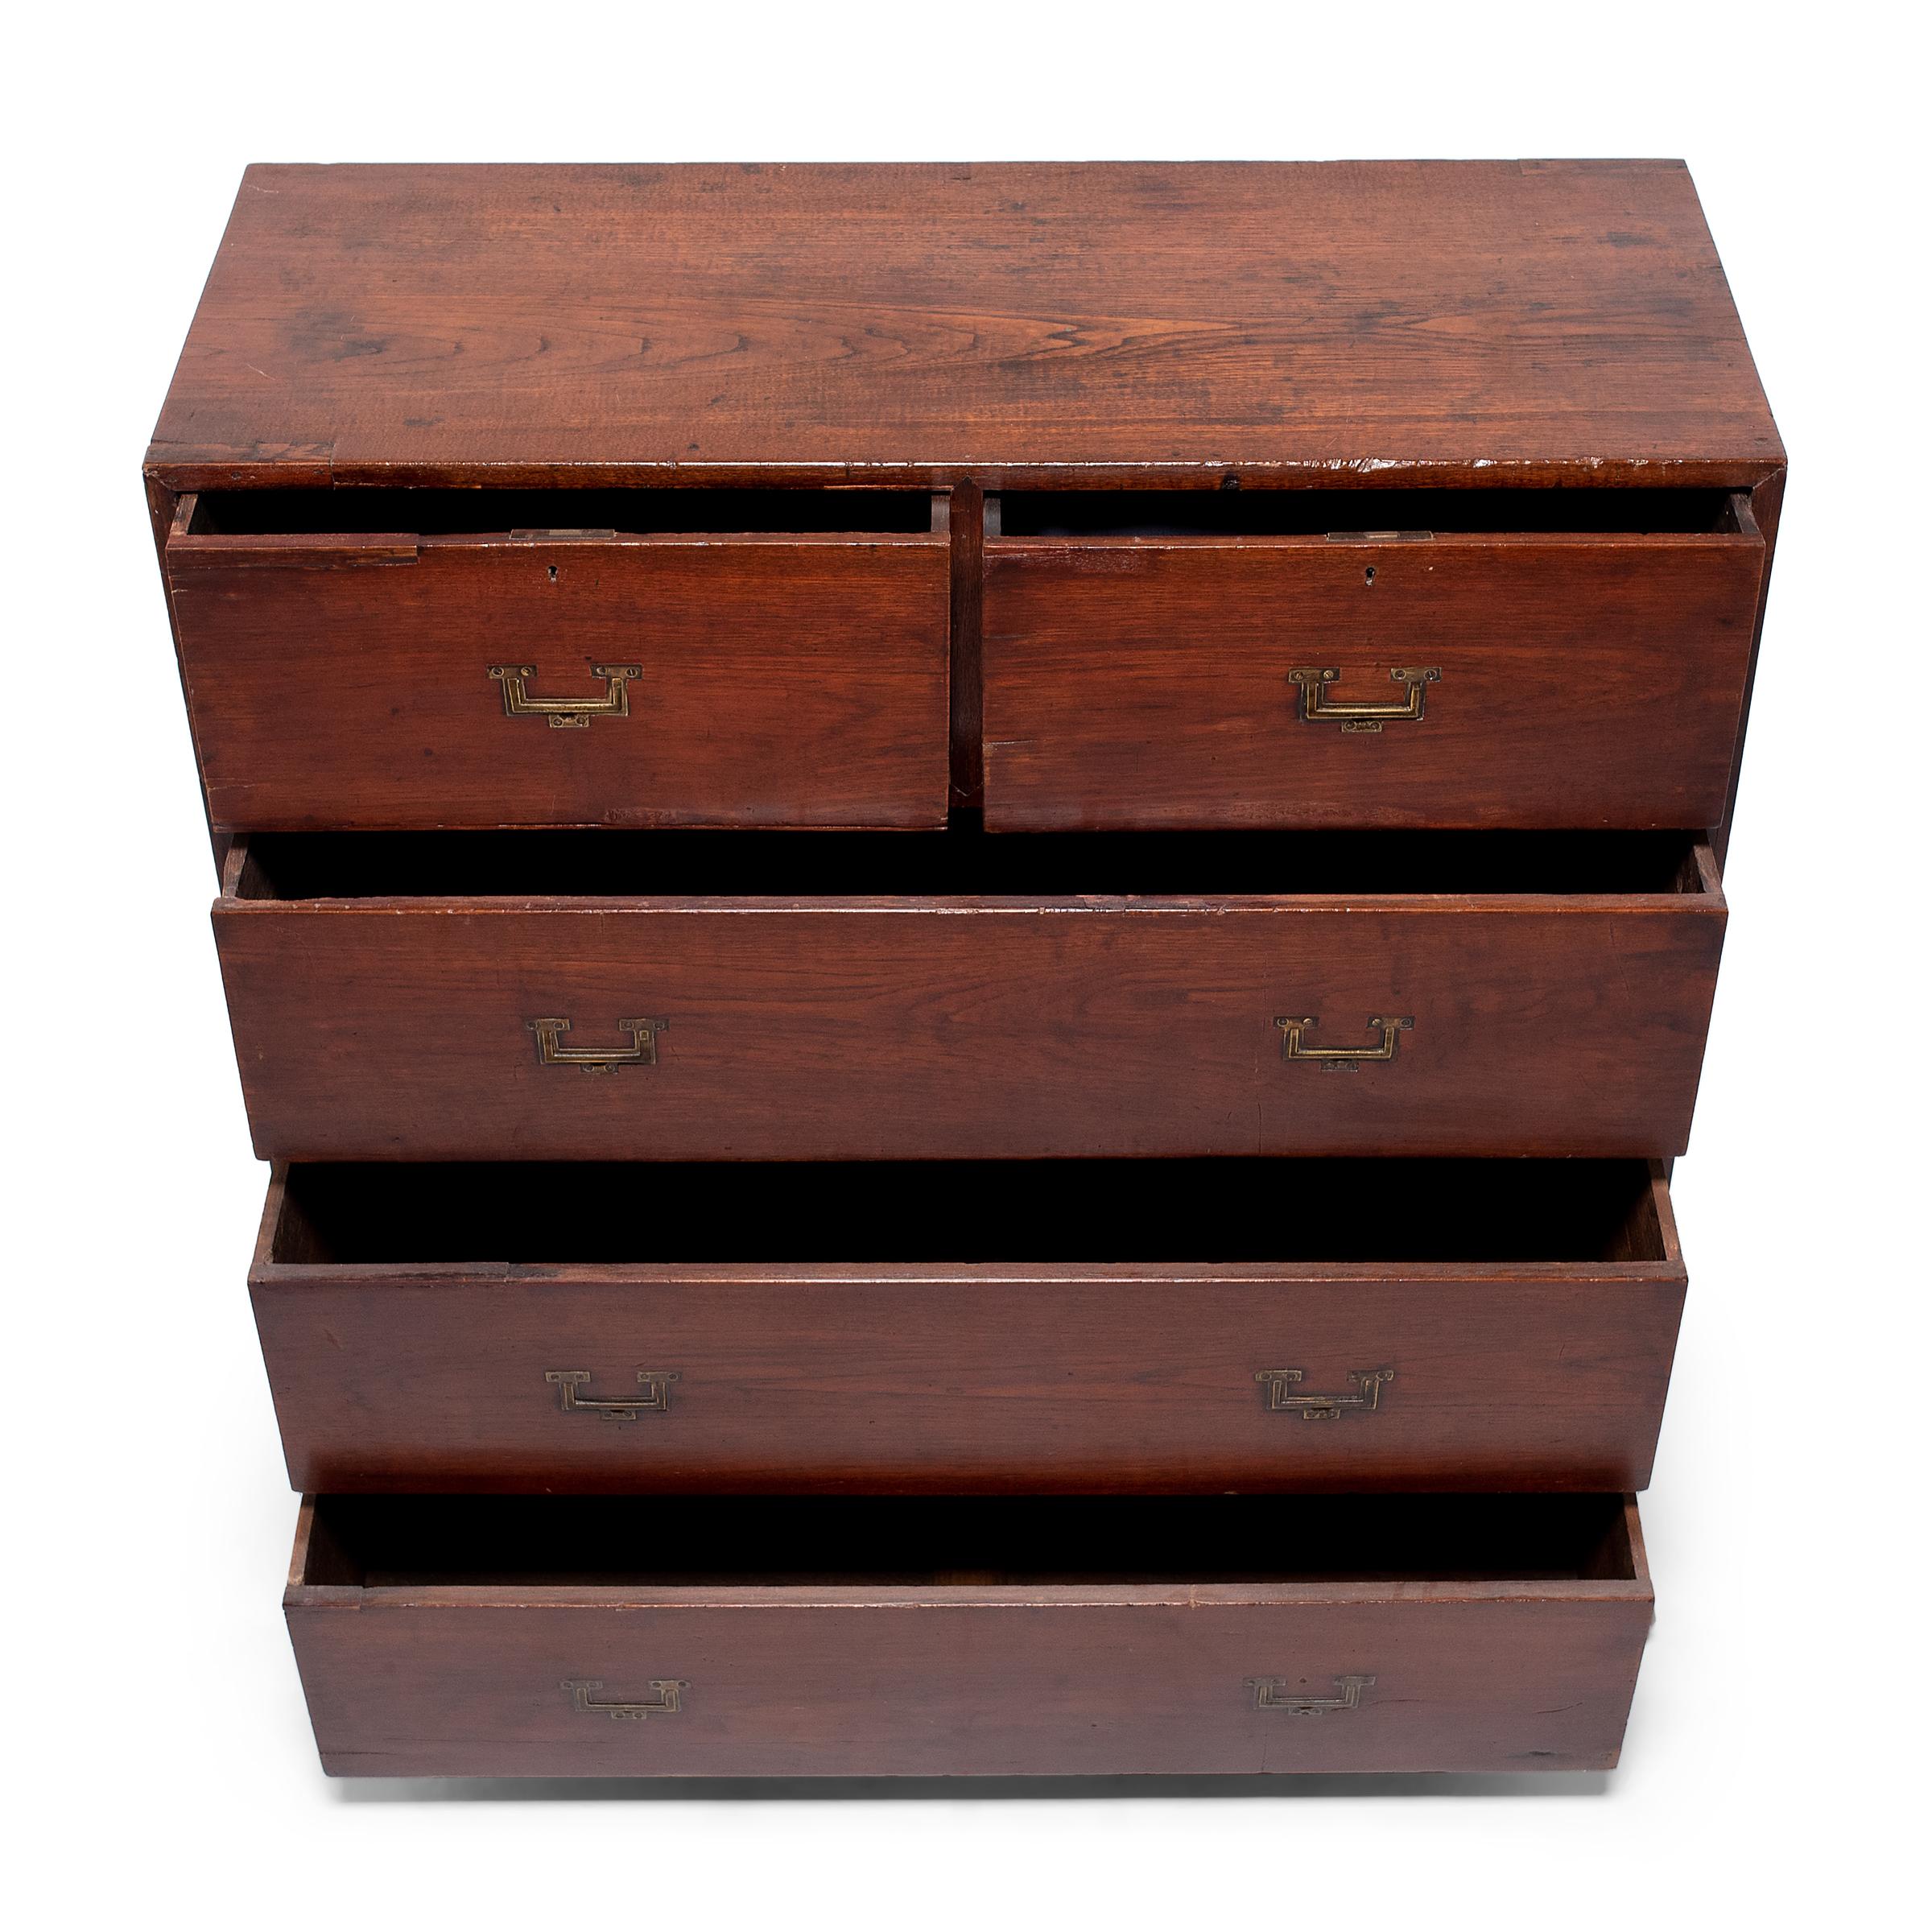 Brass English Campaign Style Mahogany Stacking Chest of Drawers, c. 1900